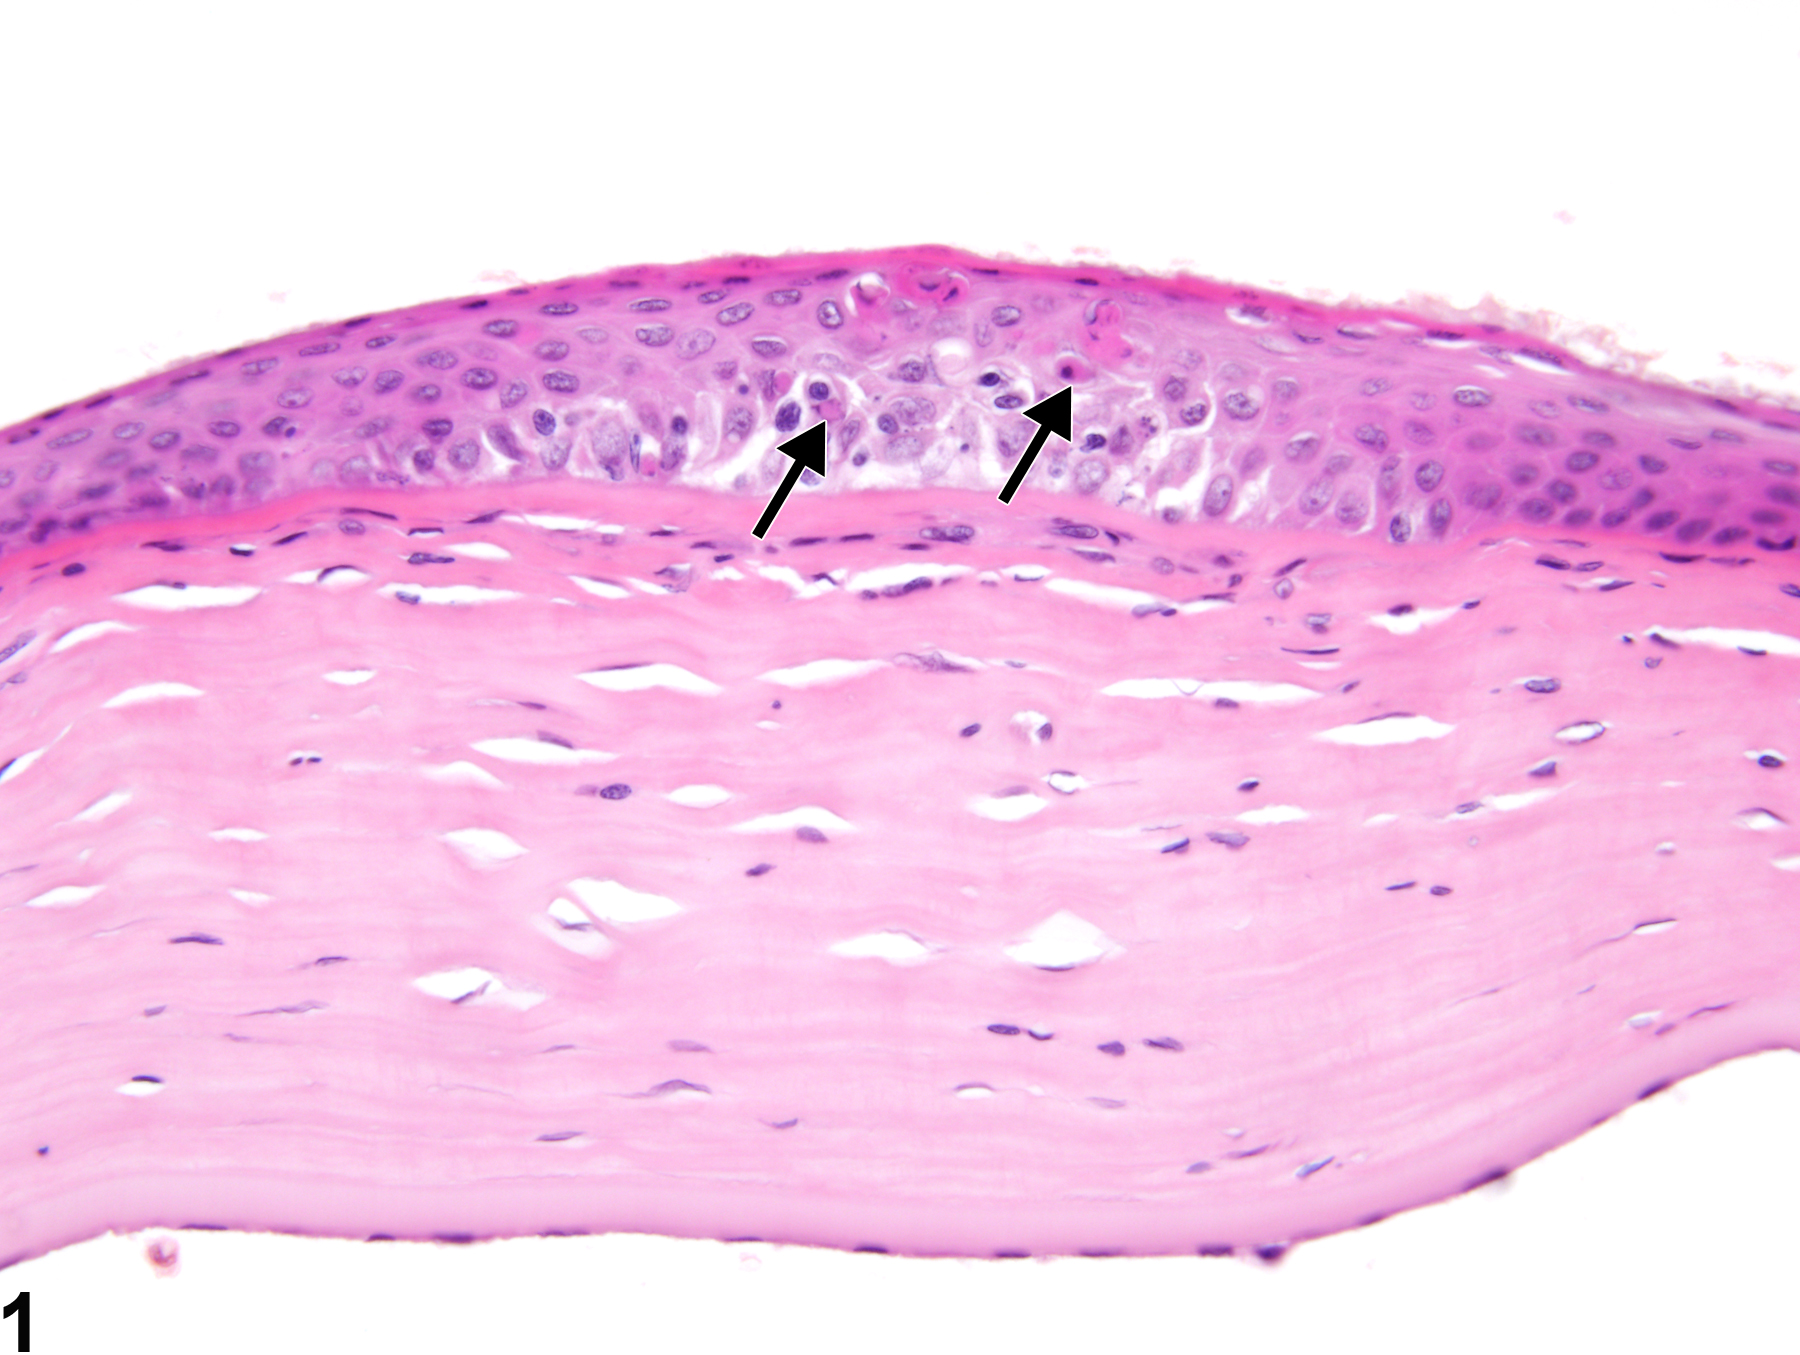 Image of cornea necrosis in the eye from a female F344/N rat in a chronic study